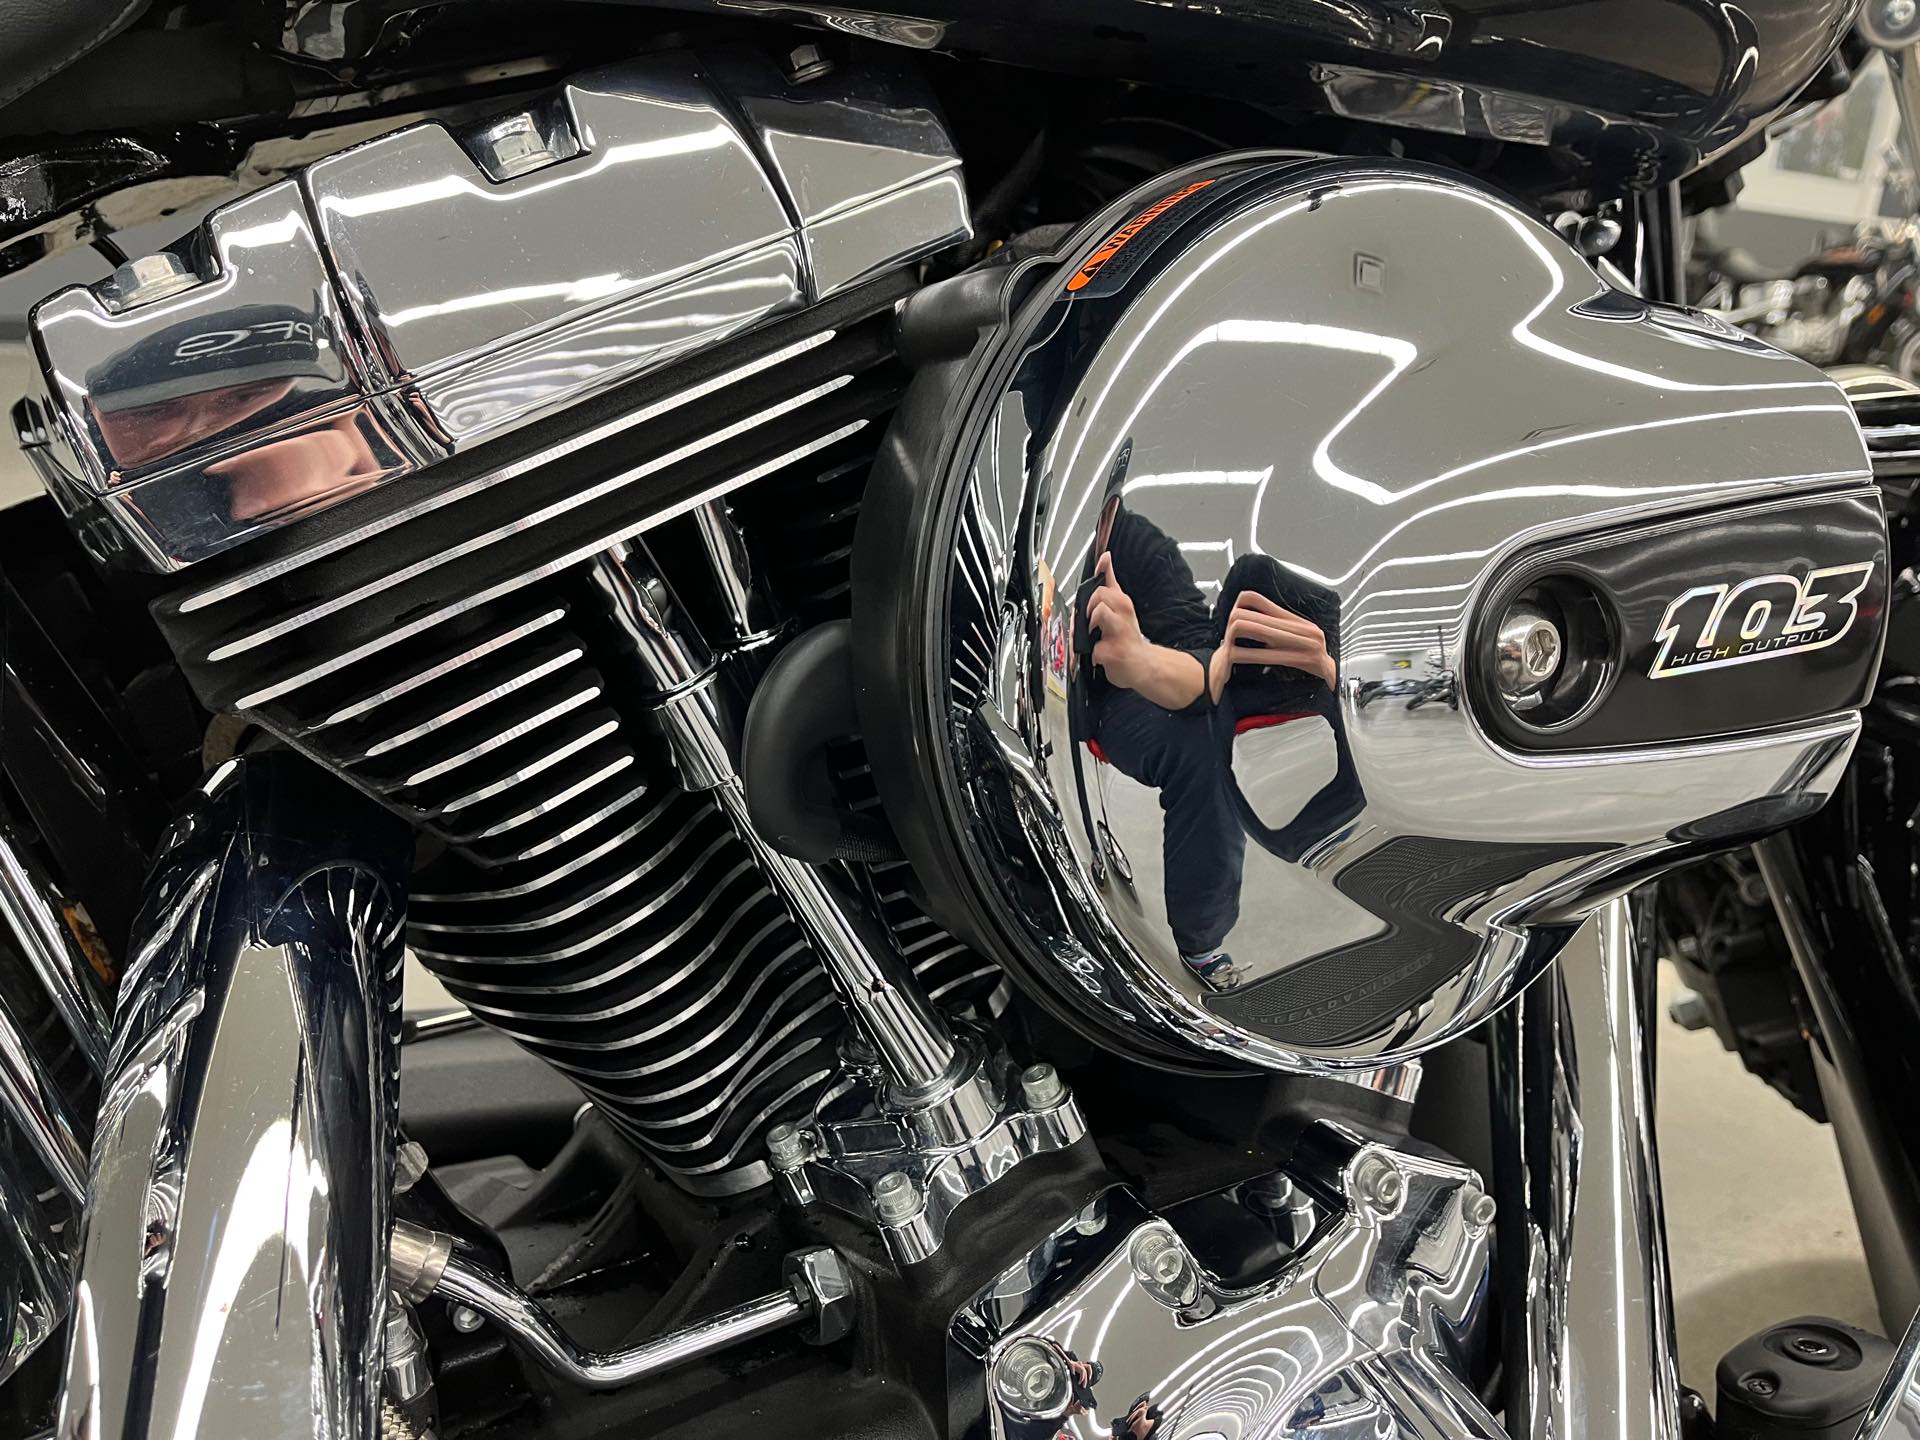 2016 Harley-Davidson Softail Heritage Softail Classic at Aces Motorcycles - Denver